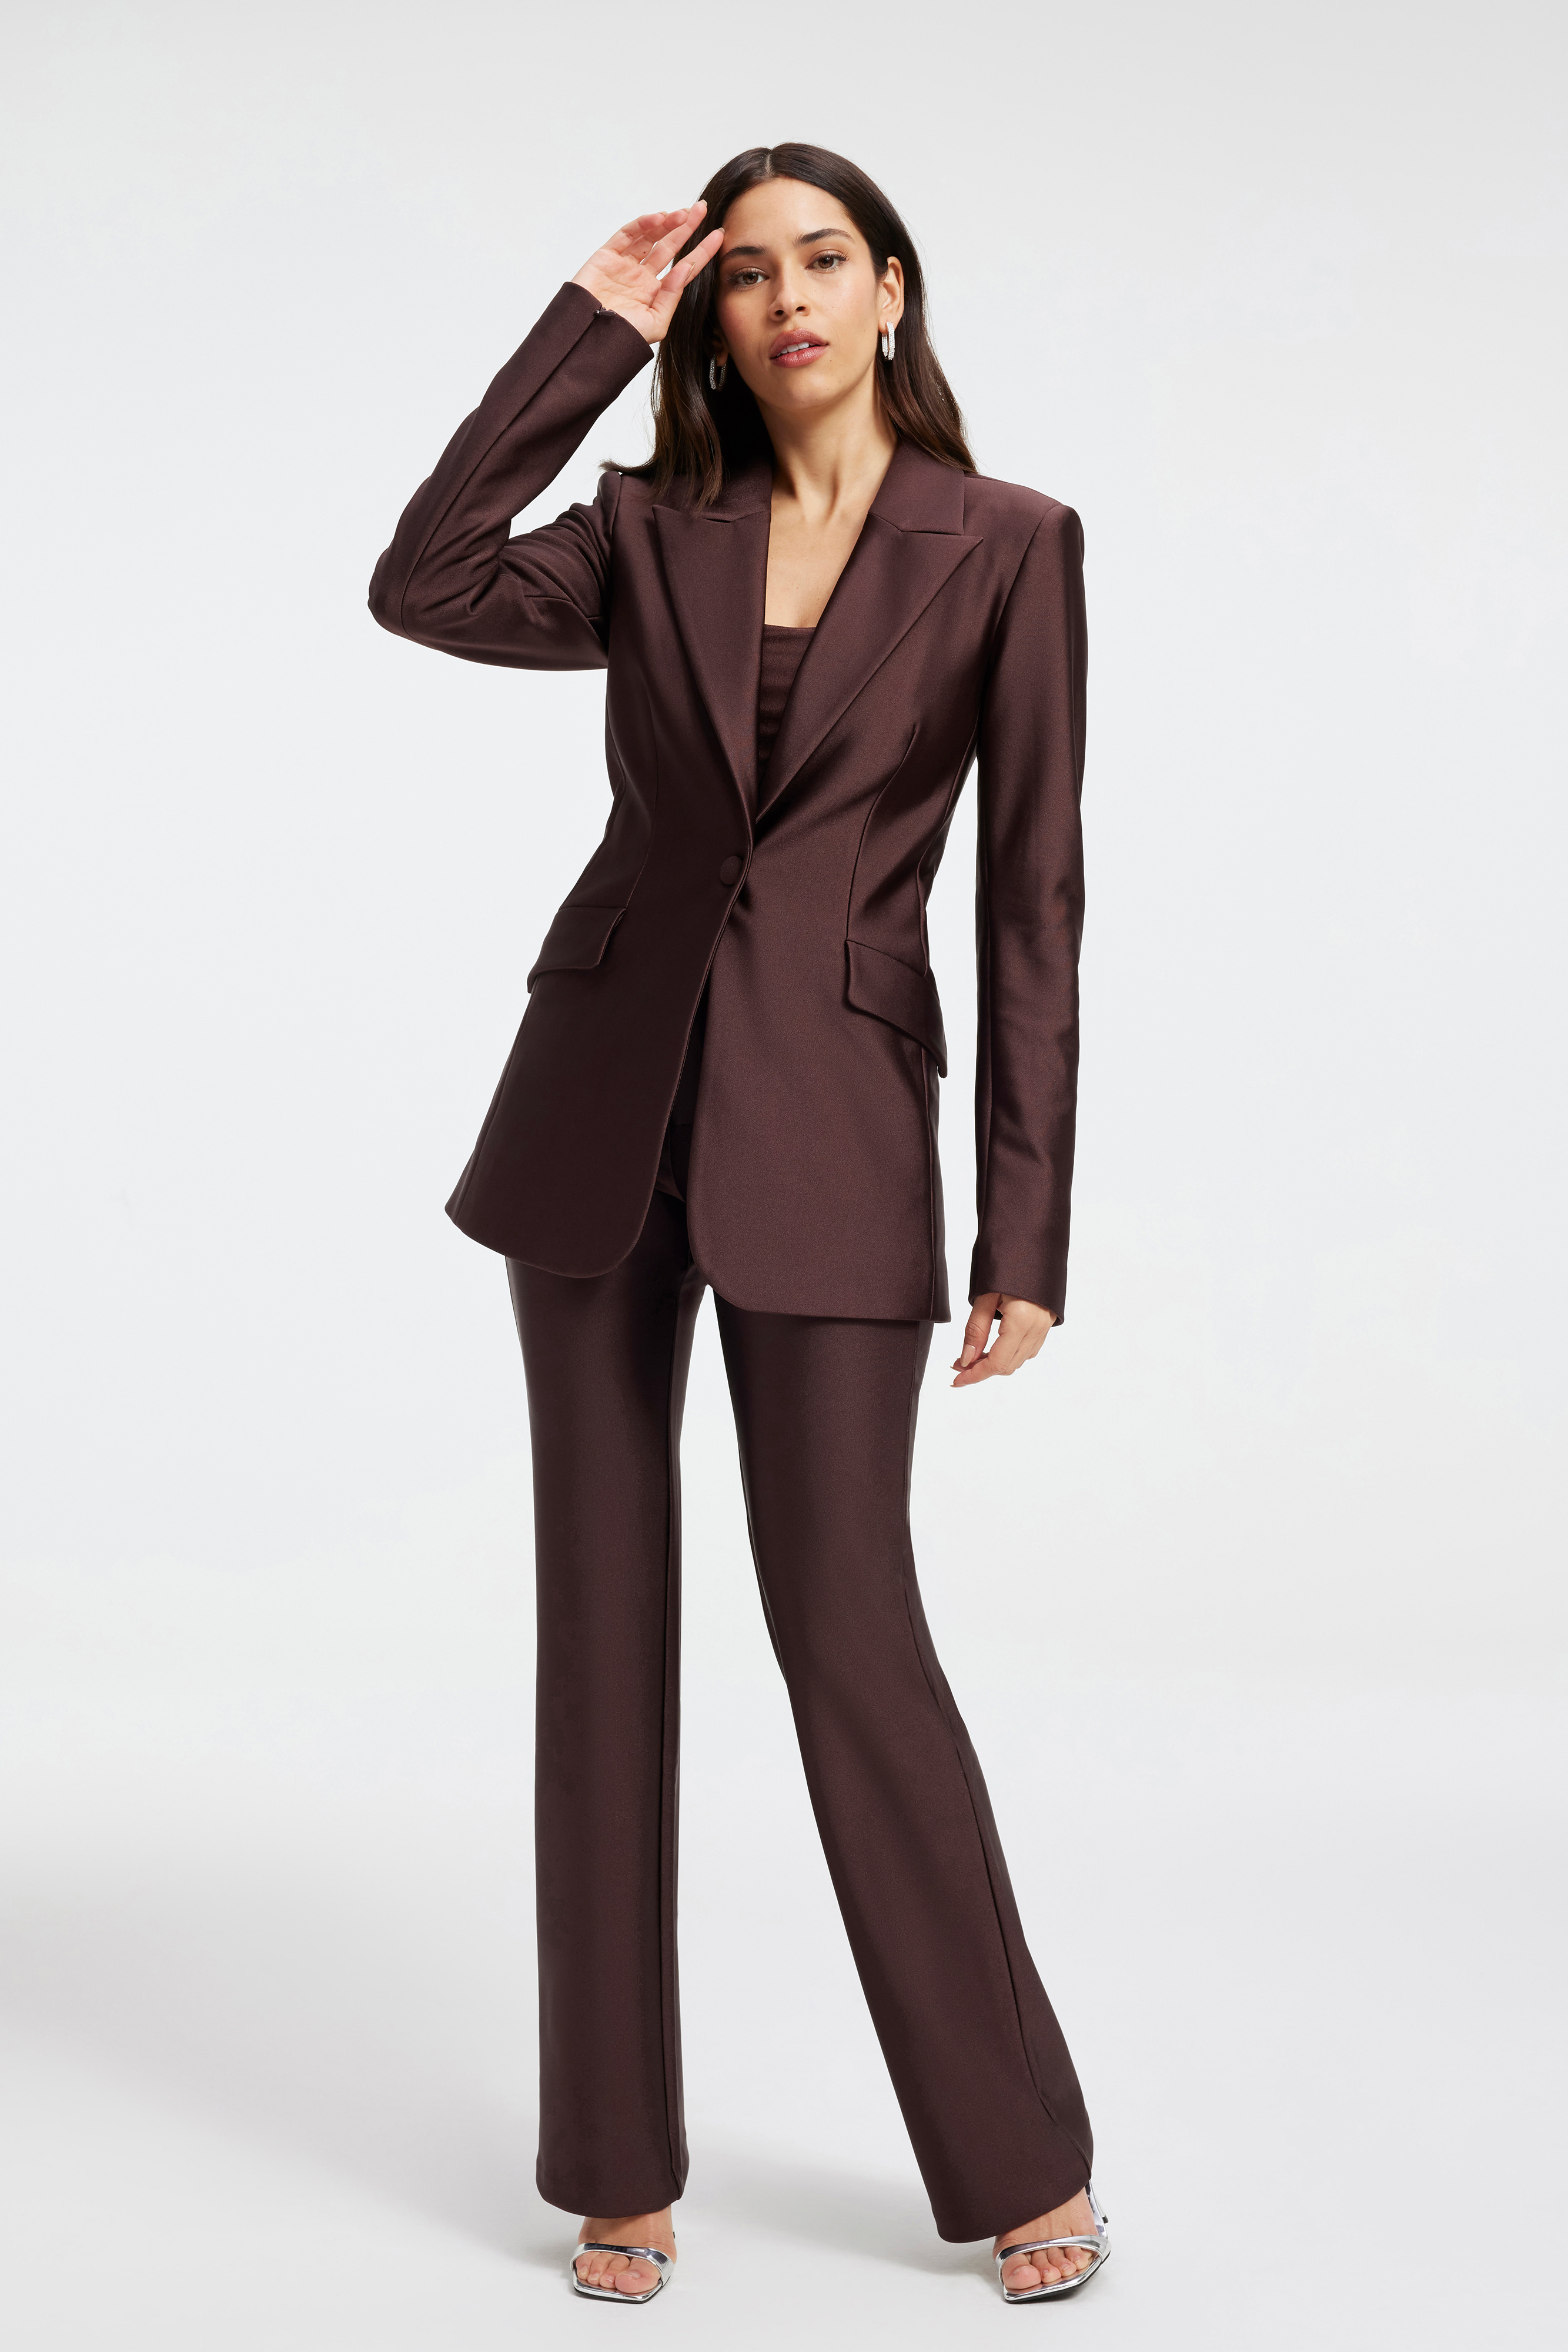 Styled with COMPRESSION SHINE SCULPTED BLAZER | DARK COCOA